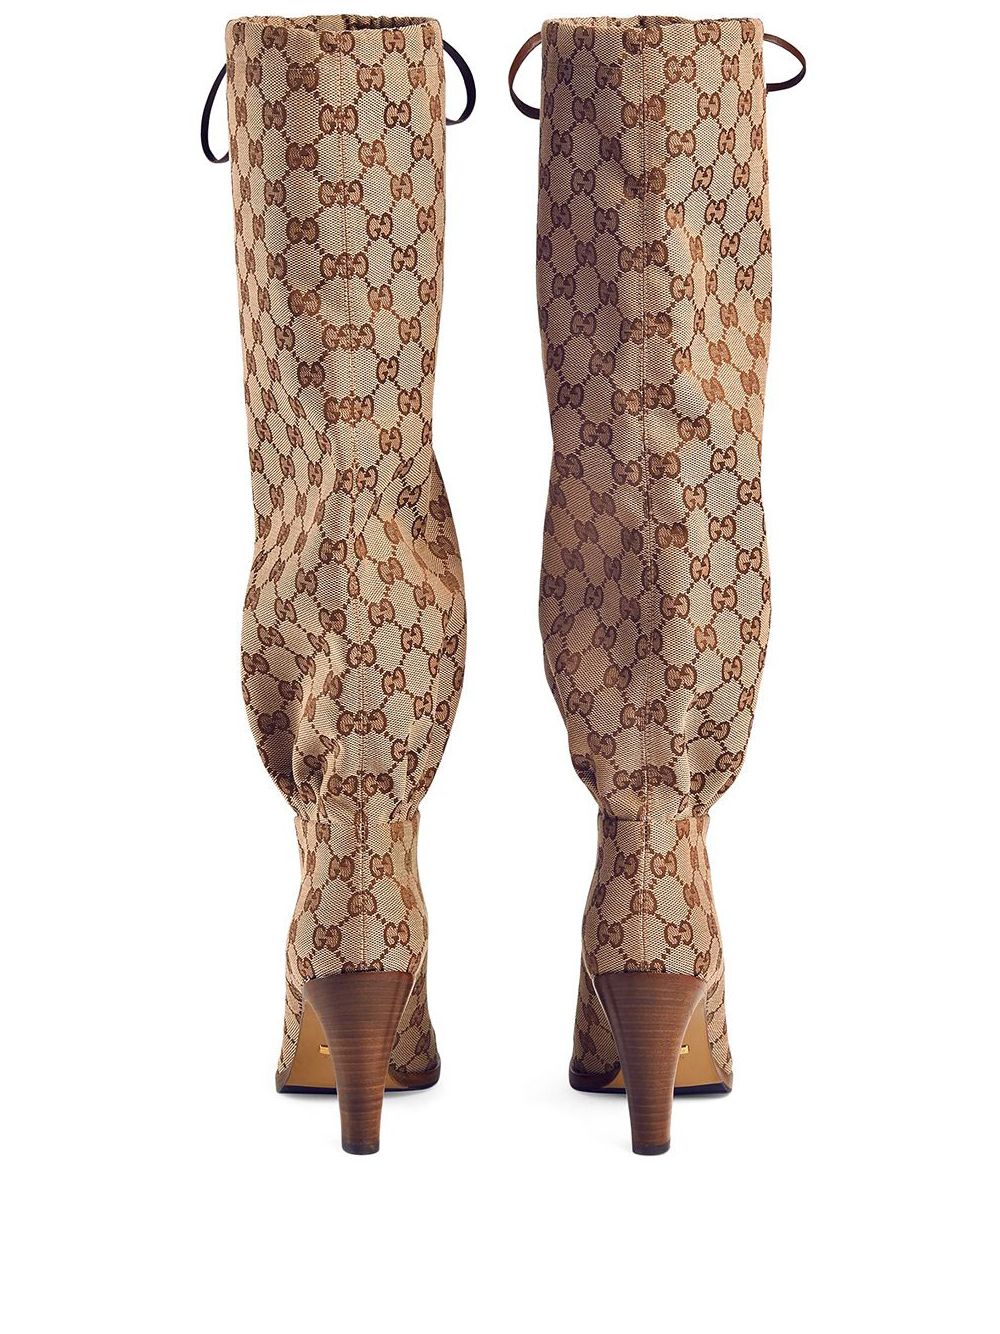 AUTHENTIC GUCCI CANVAS OVER THE KNEE BOOTS HEEL - clothing & accessories -  by owner - apparel sale - craigslist